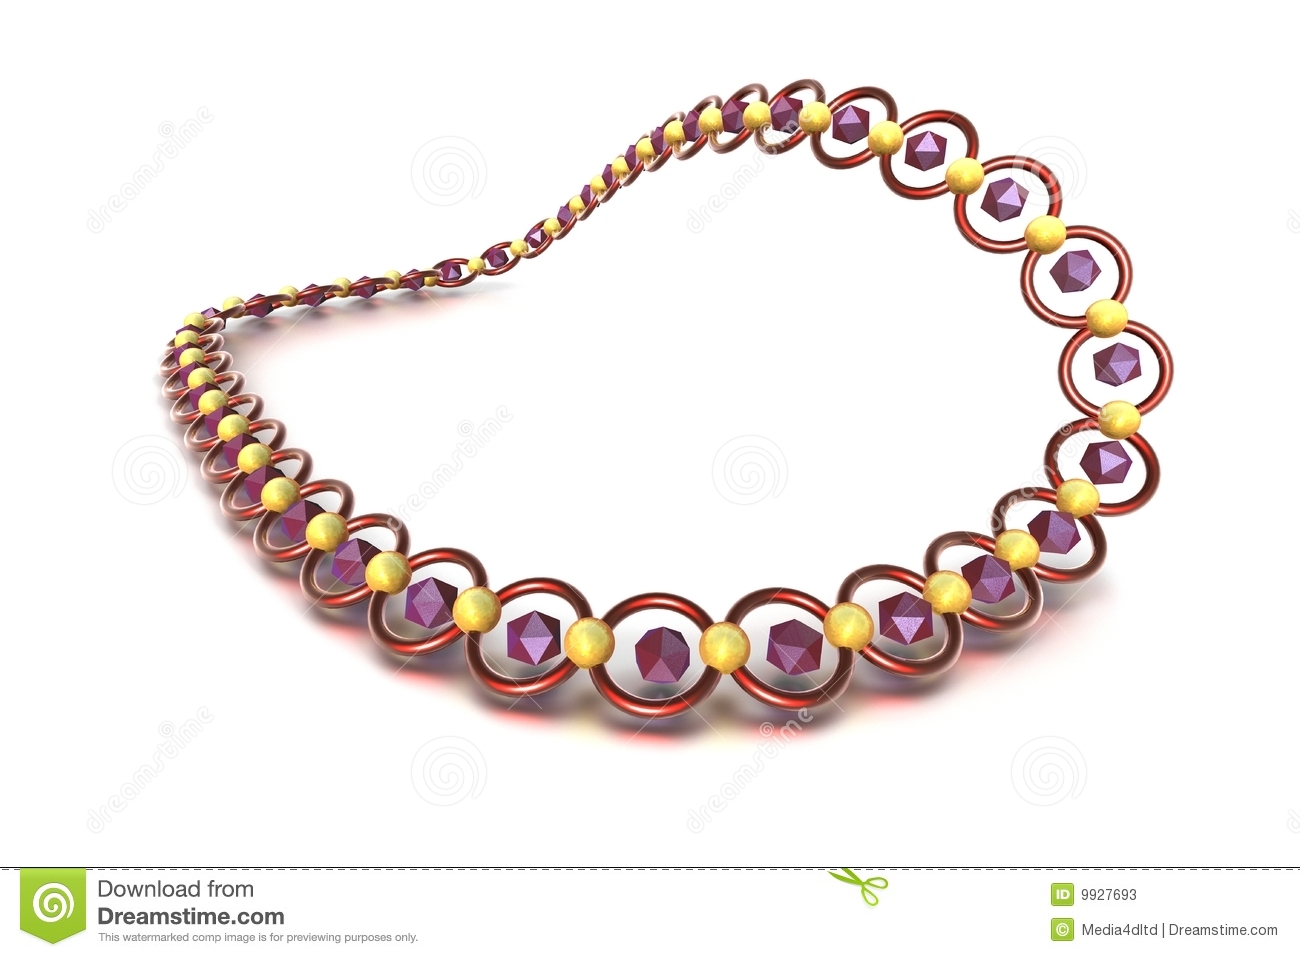 Related  Bead Clipart  Pearl Necklace Clipart  Jewelry Clipart